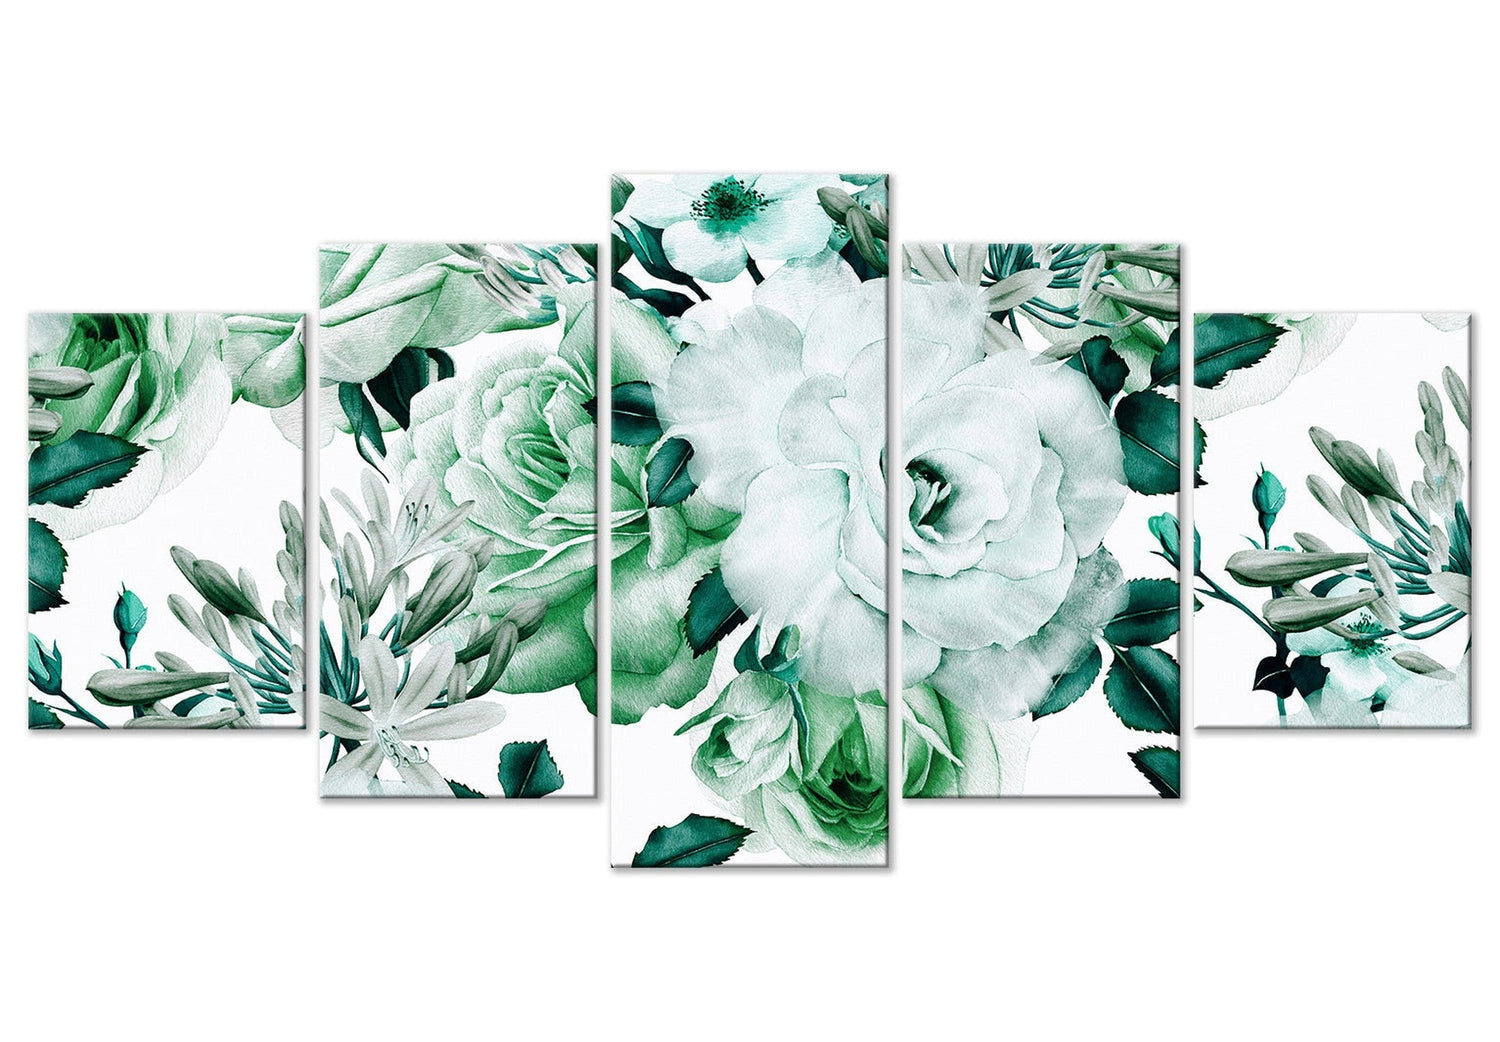 Floral Canvas Wall Art - Green Vintage Roses - 5 Pieces